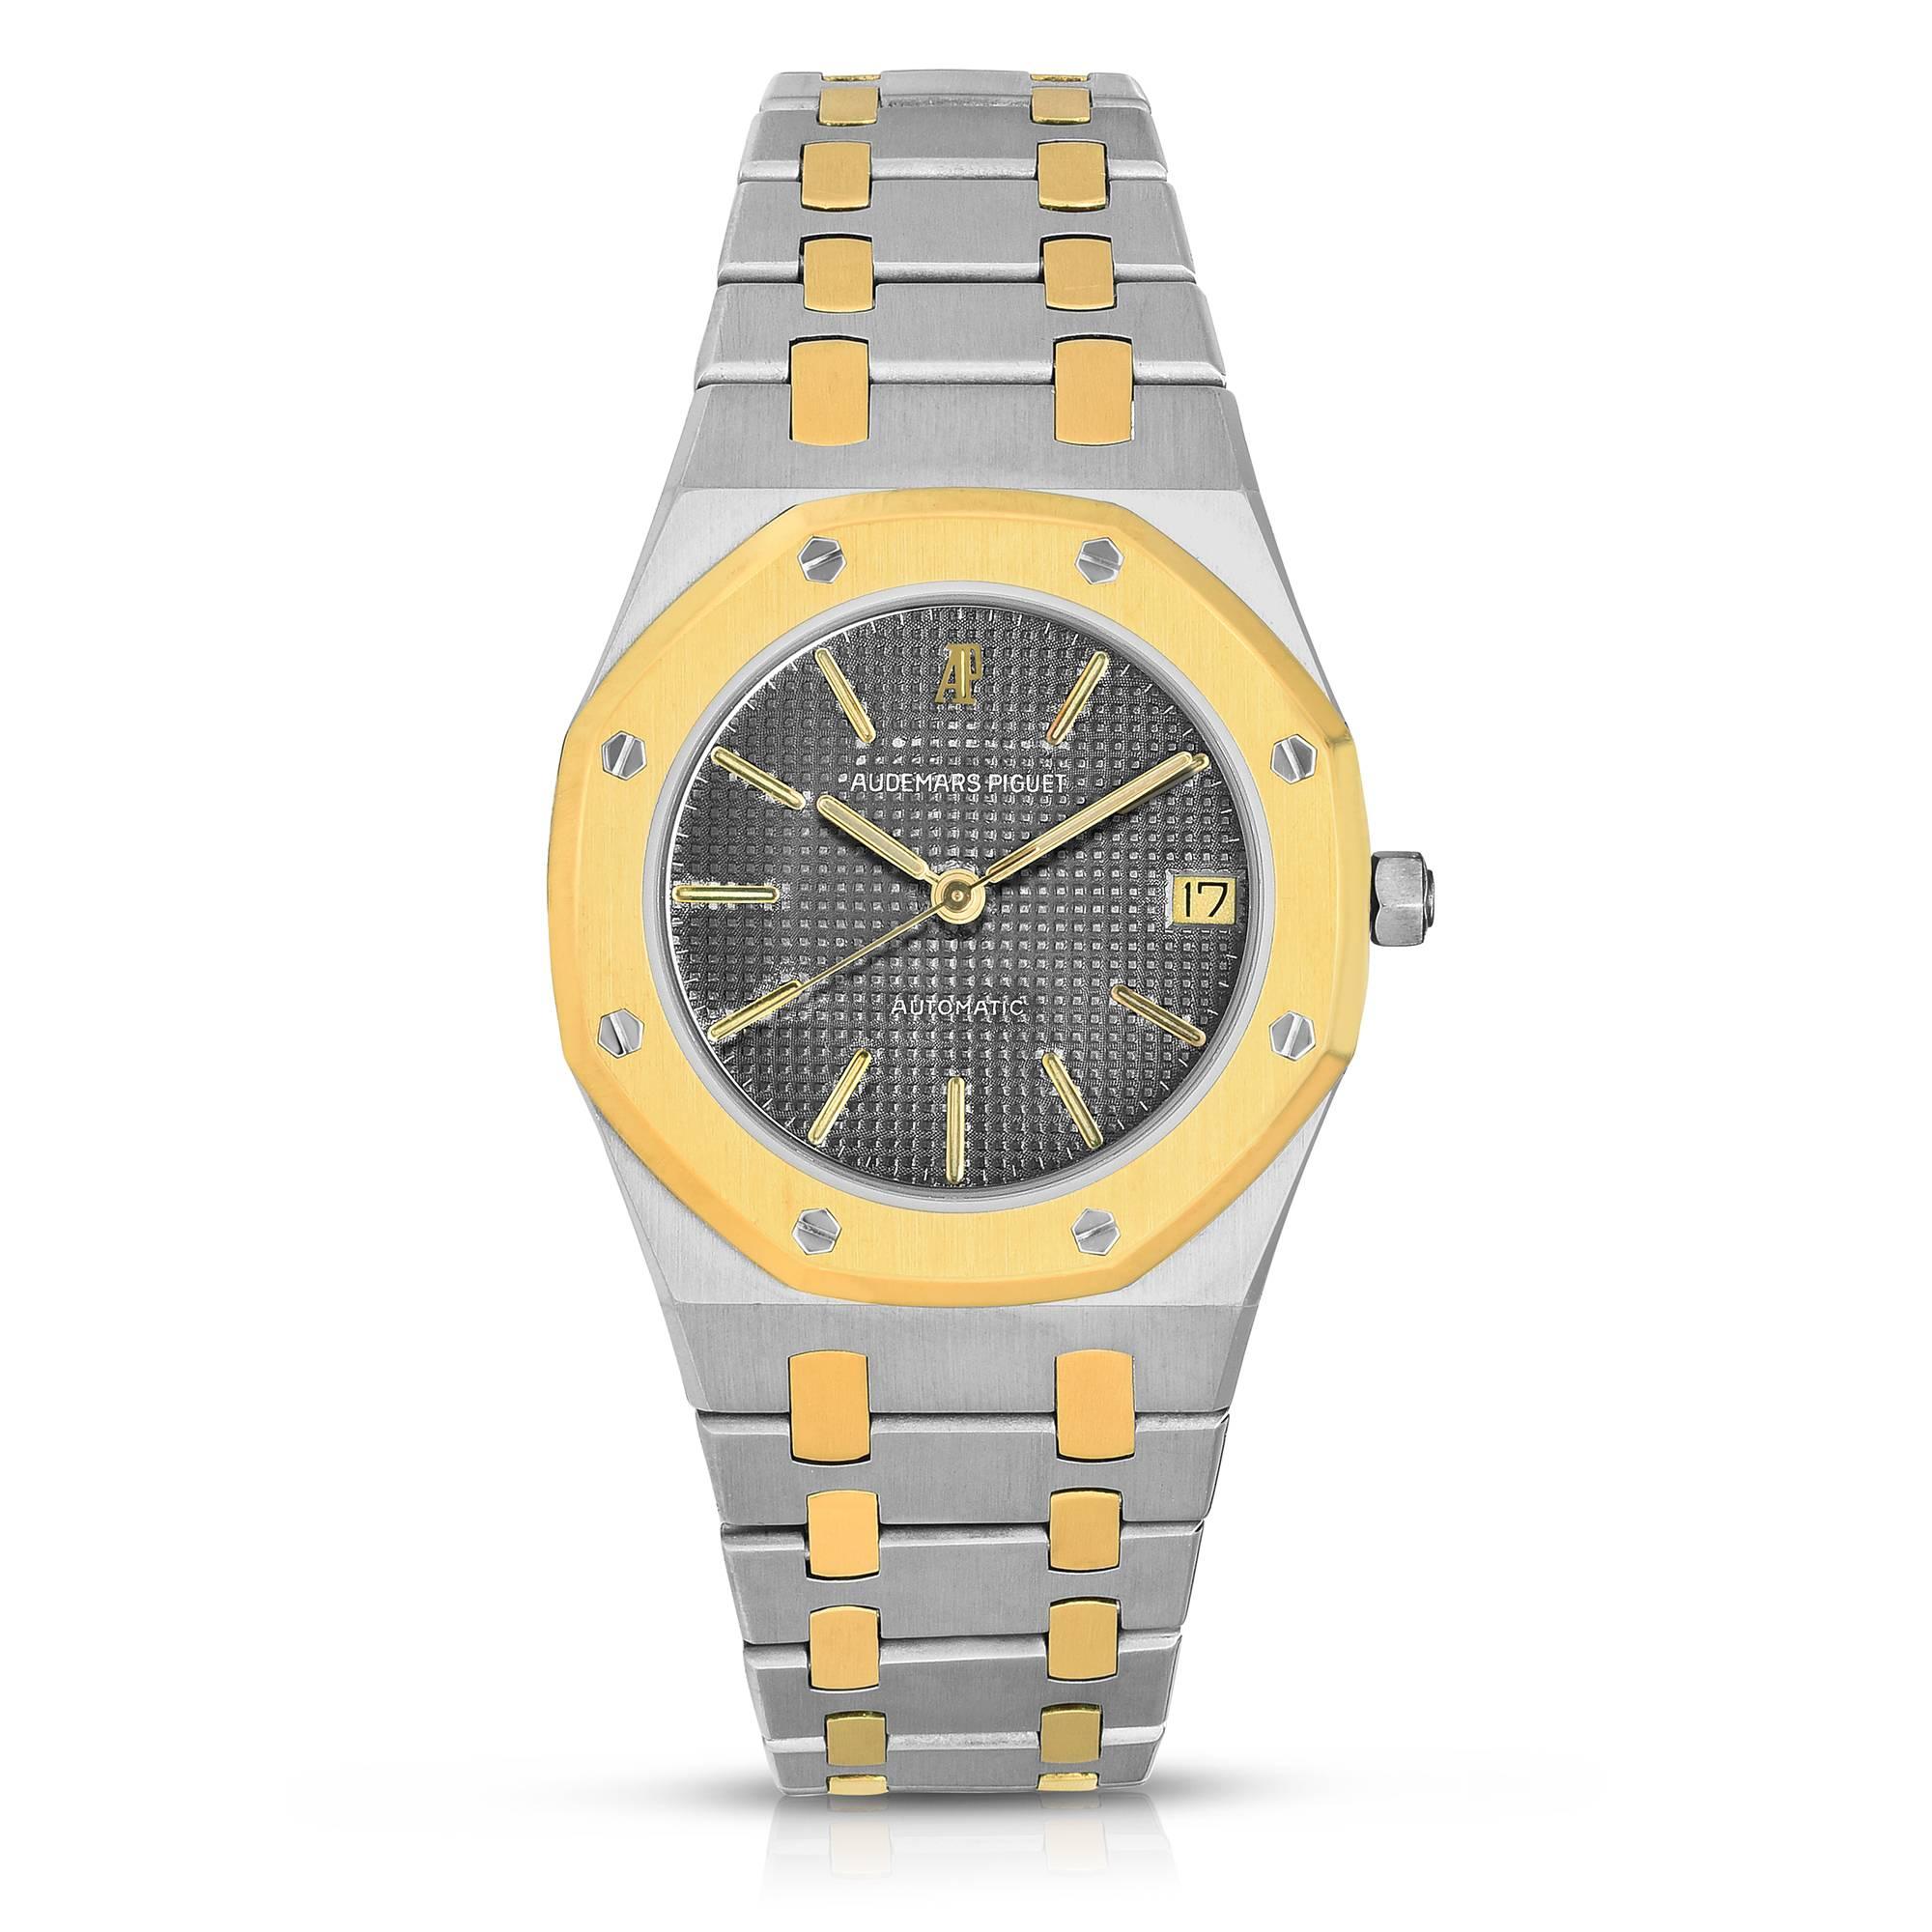 Audemars Piguet Royal Oak Automatic Watch
Stainless Steel and 18K Yellow Gold Case
Automatic Movement
Reference 4100 with Three Piece Case
18K Yellow Gold Octagonal Bezel
35mm in size 
Signed 18K Yellow Gold Screw-Down Crown
Sapphire